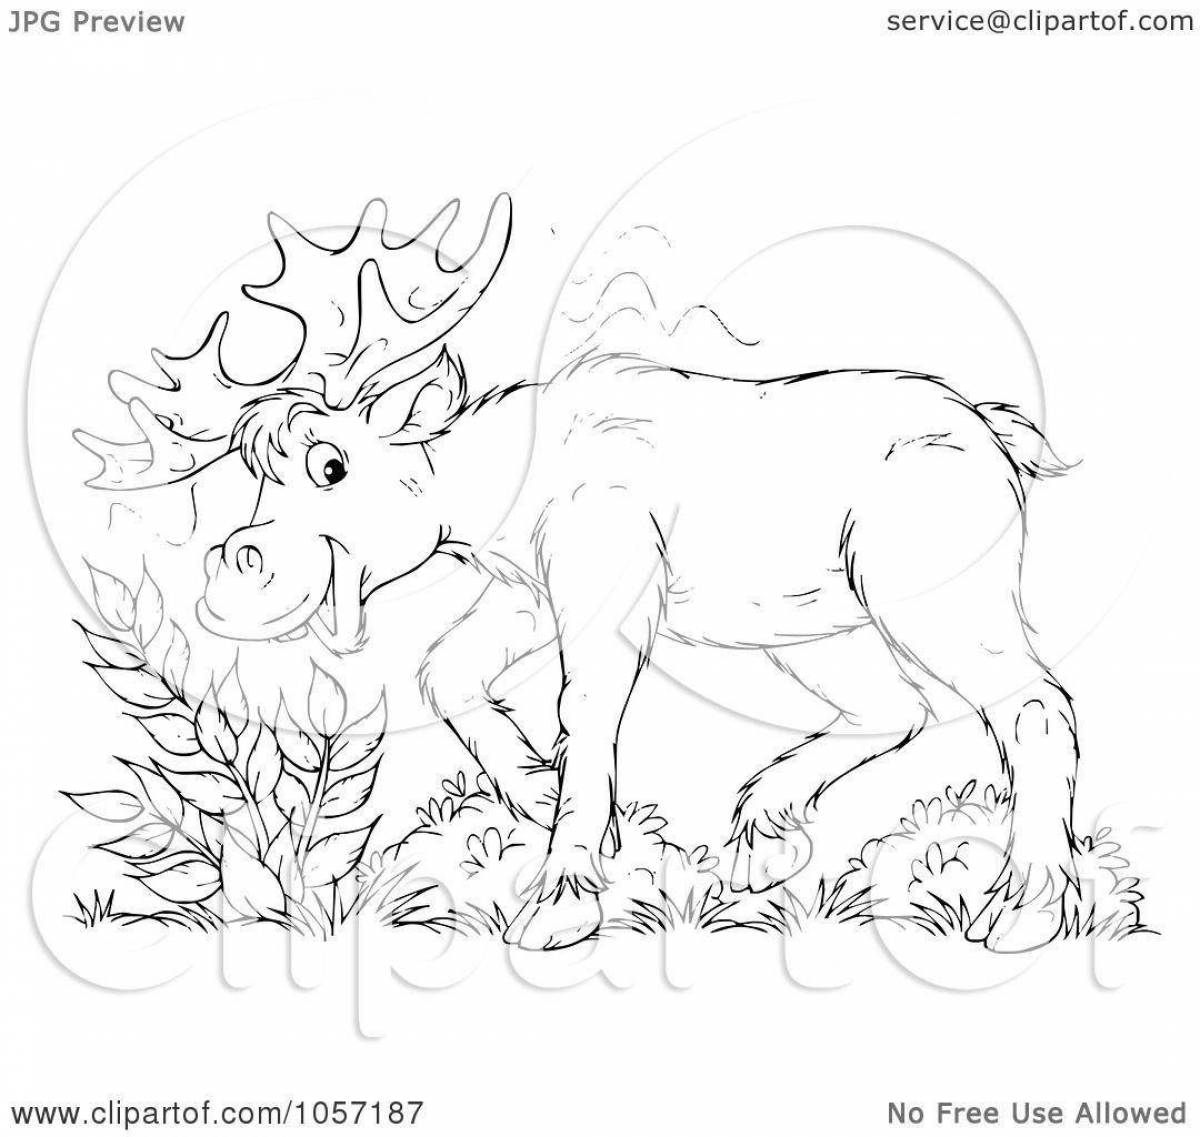 Effective moose coloring book for 6-7 year olds